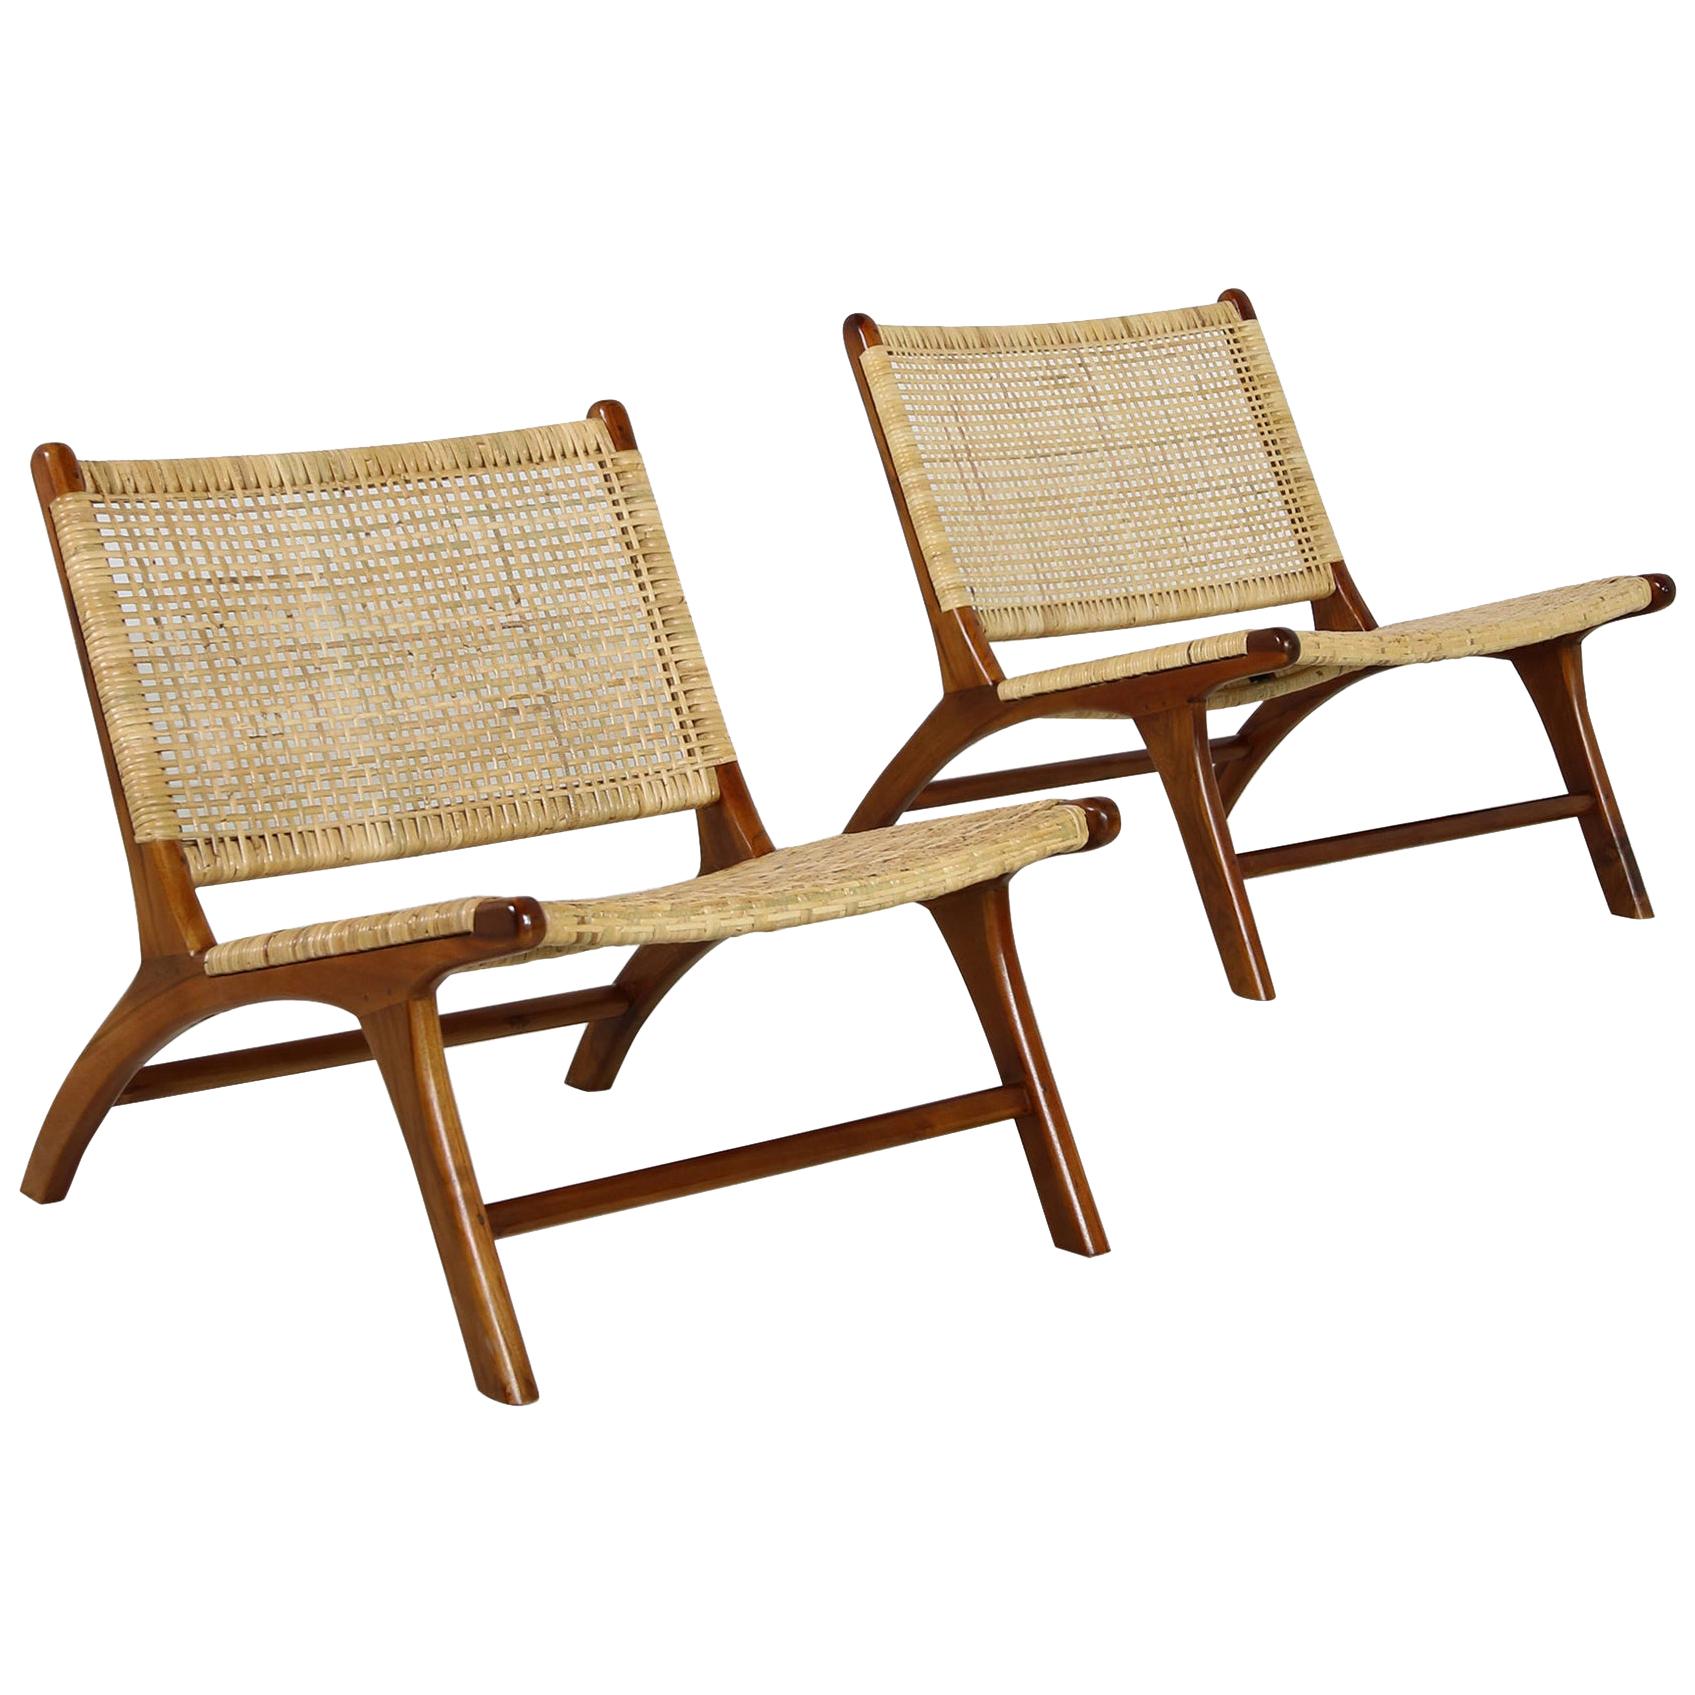 Pair of Solid Teak and Cane Lounge Chairs, Brazilian & Midcentury Style, Modern